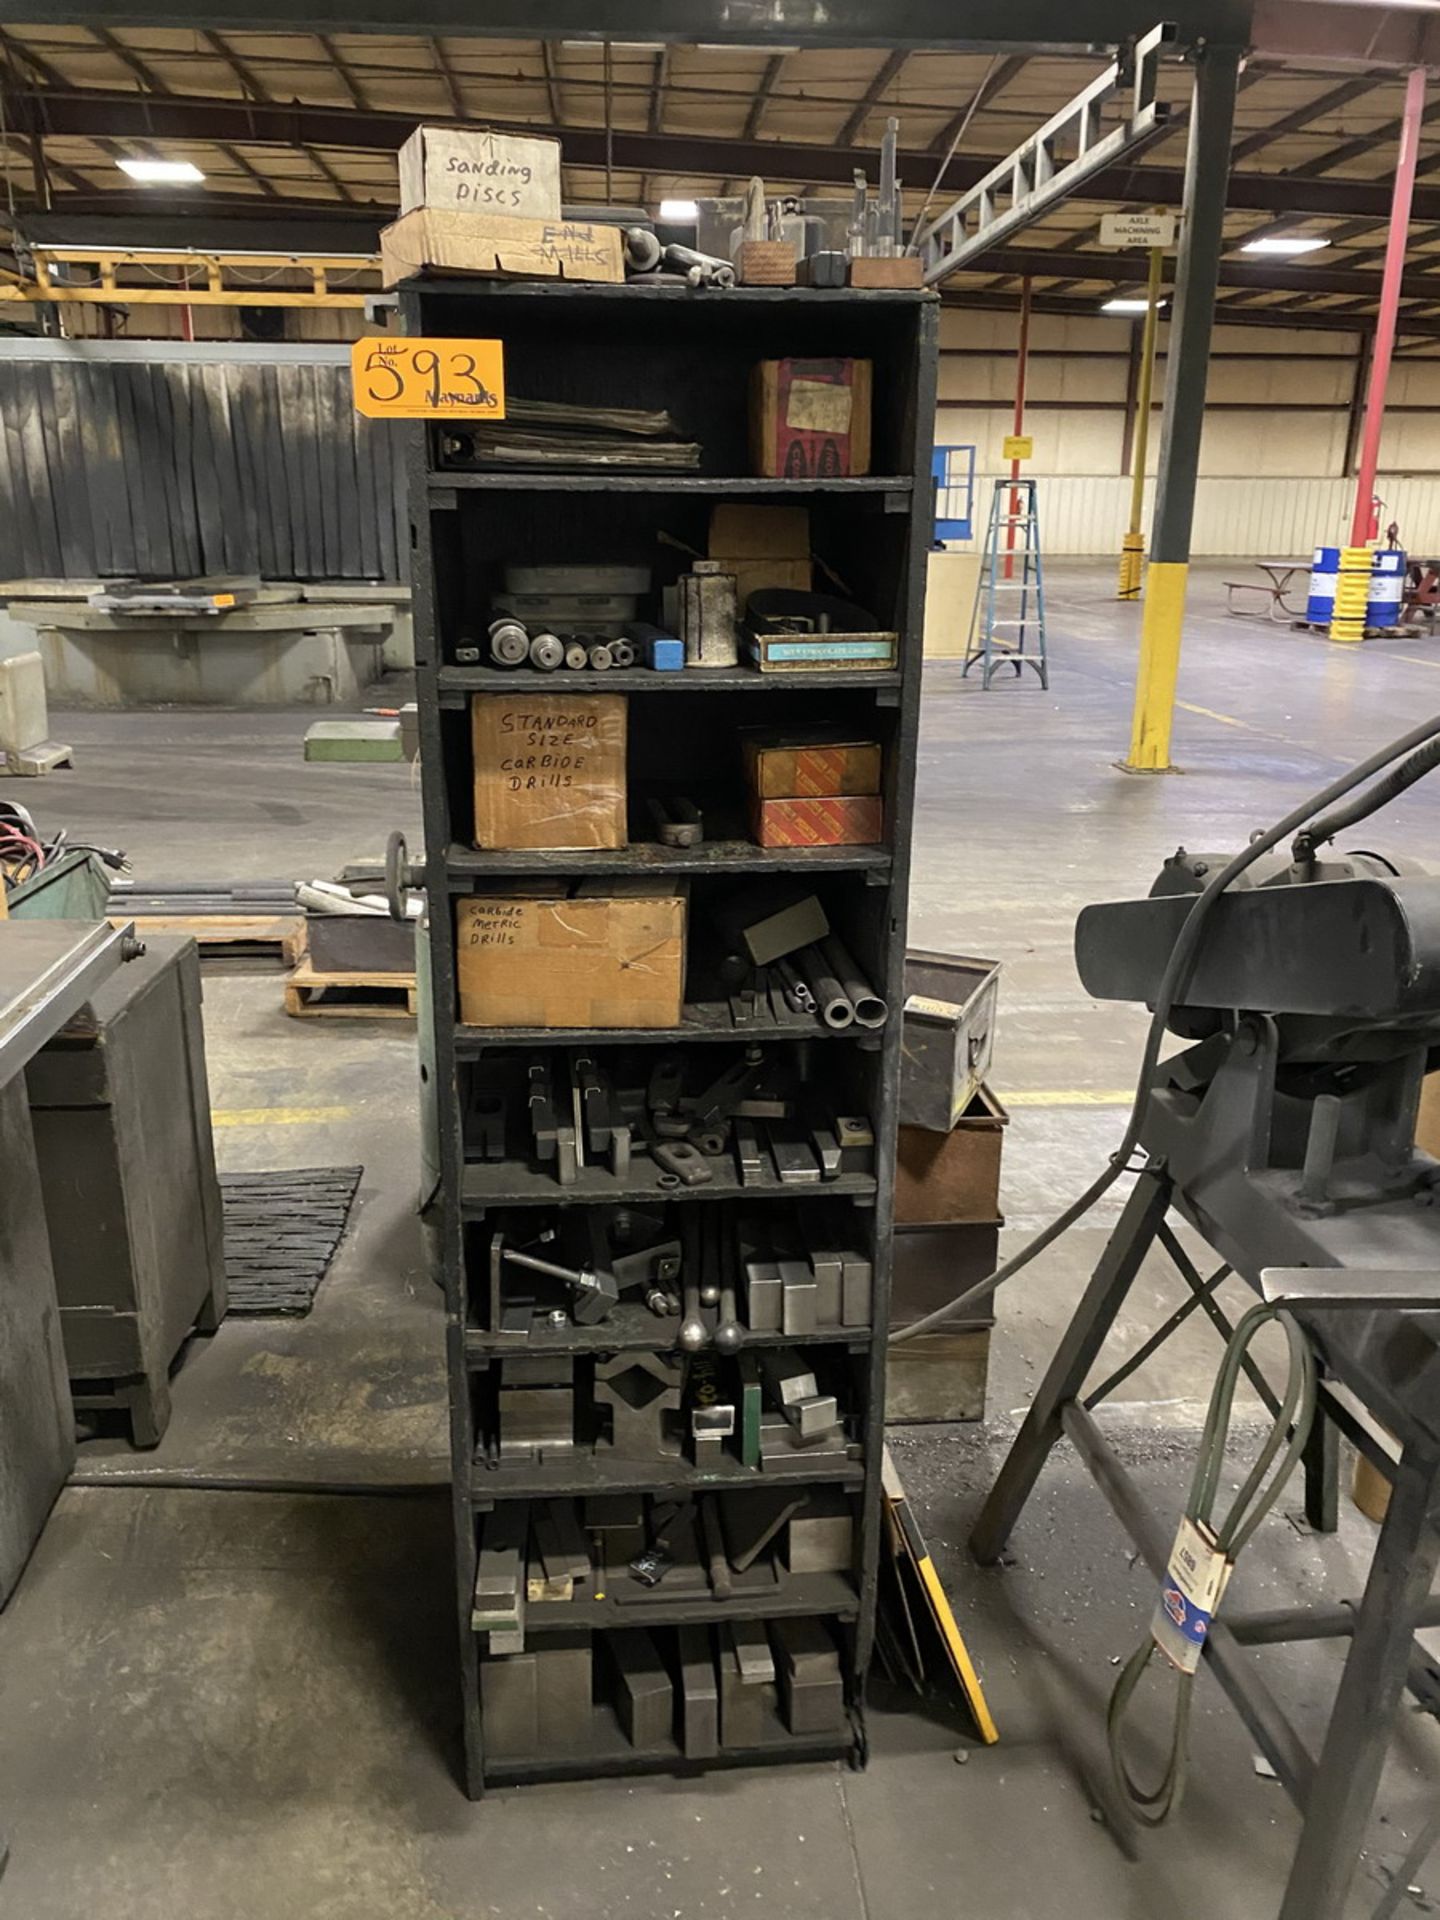 Parts Cabinets and Shelving Unit w/ Contents of Assorted Tooling